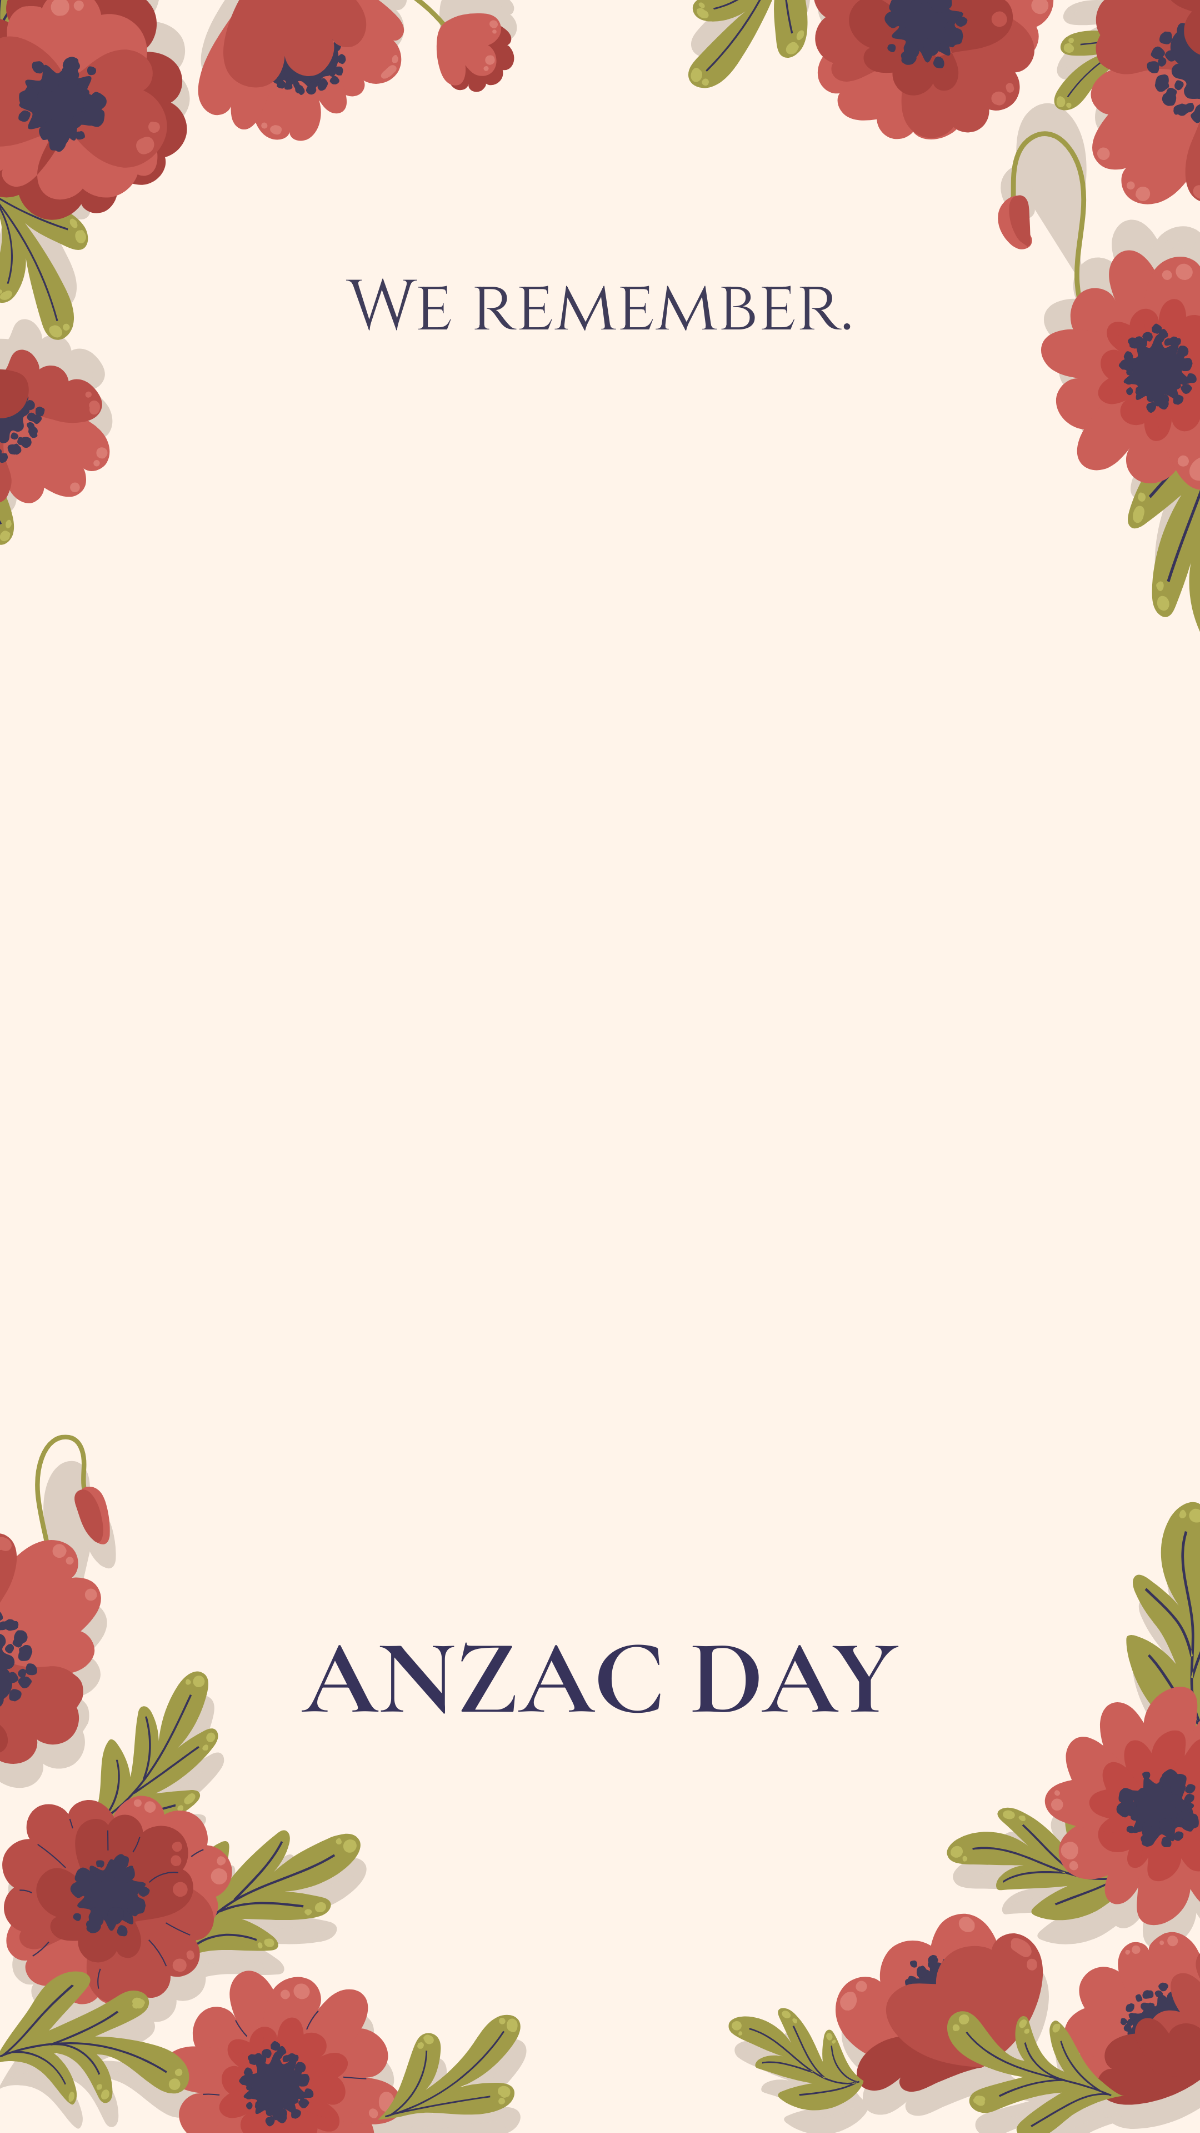 Anzac Day Snapchat Geofilter Template